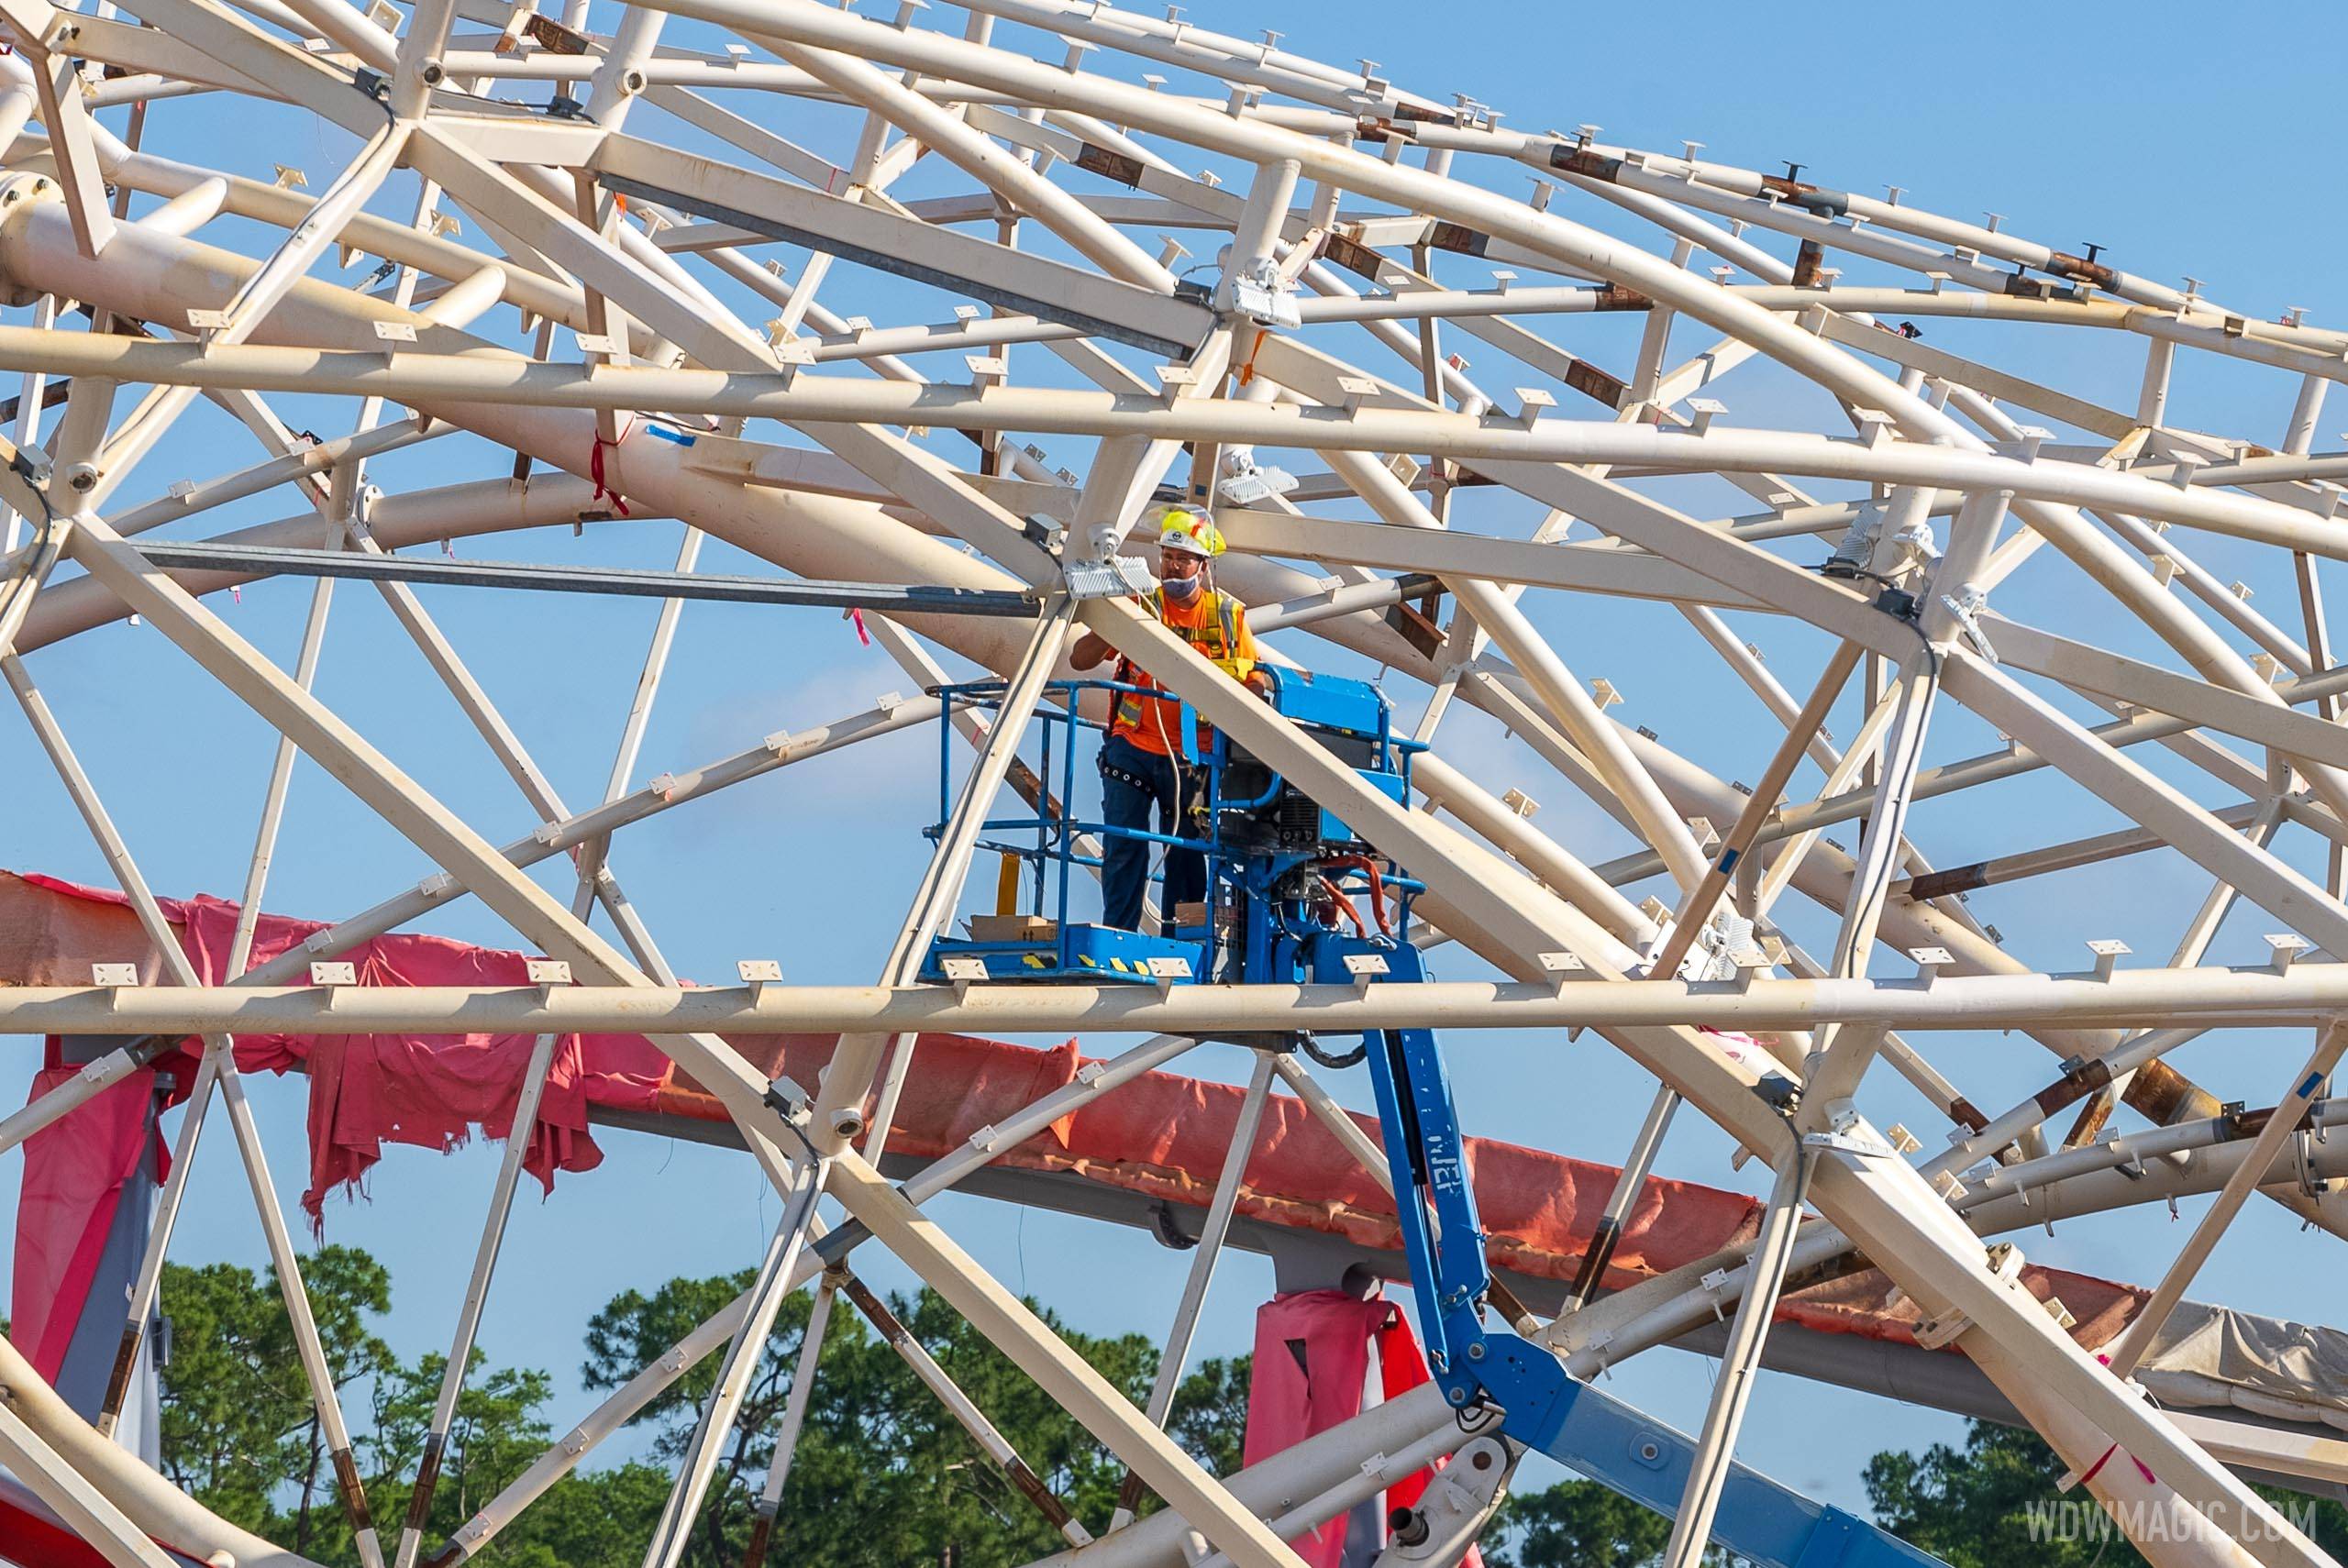 Lighting systems being installed in the canopy at TRON Lightcyle Run